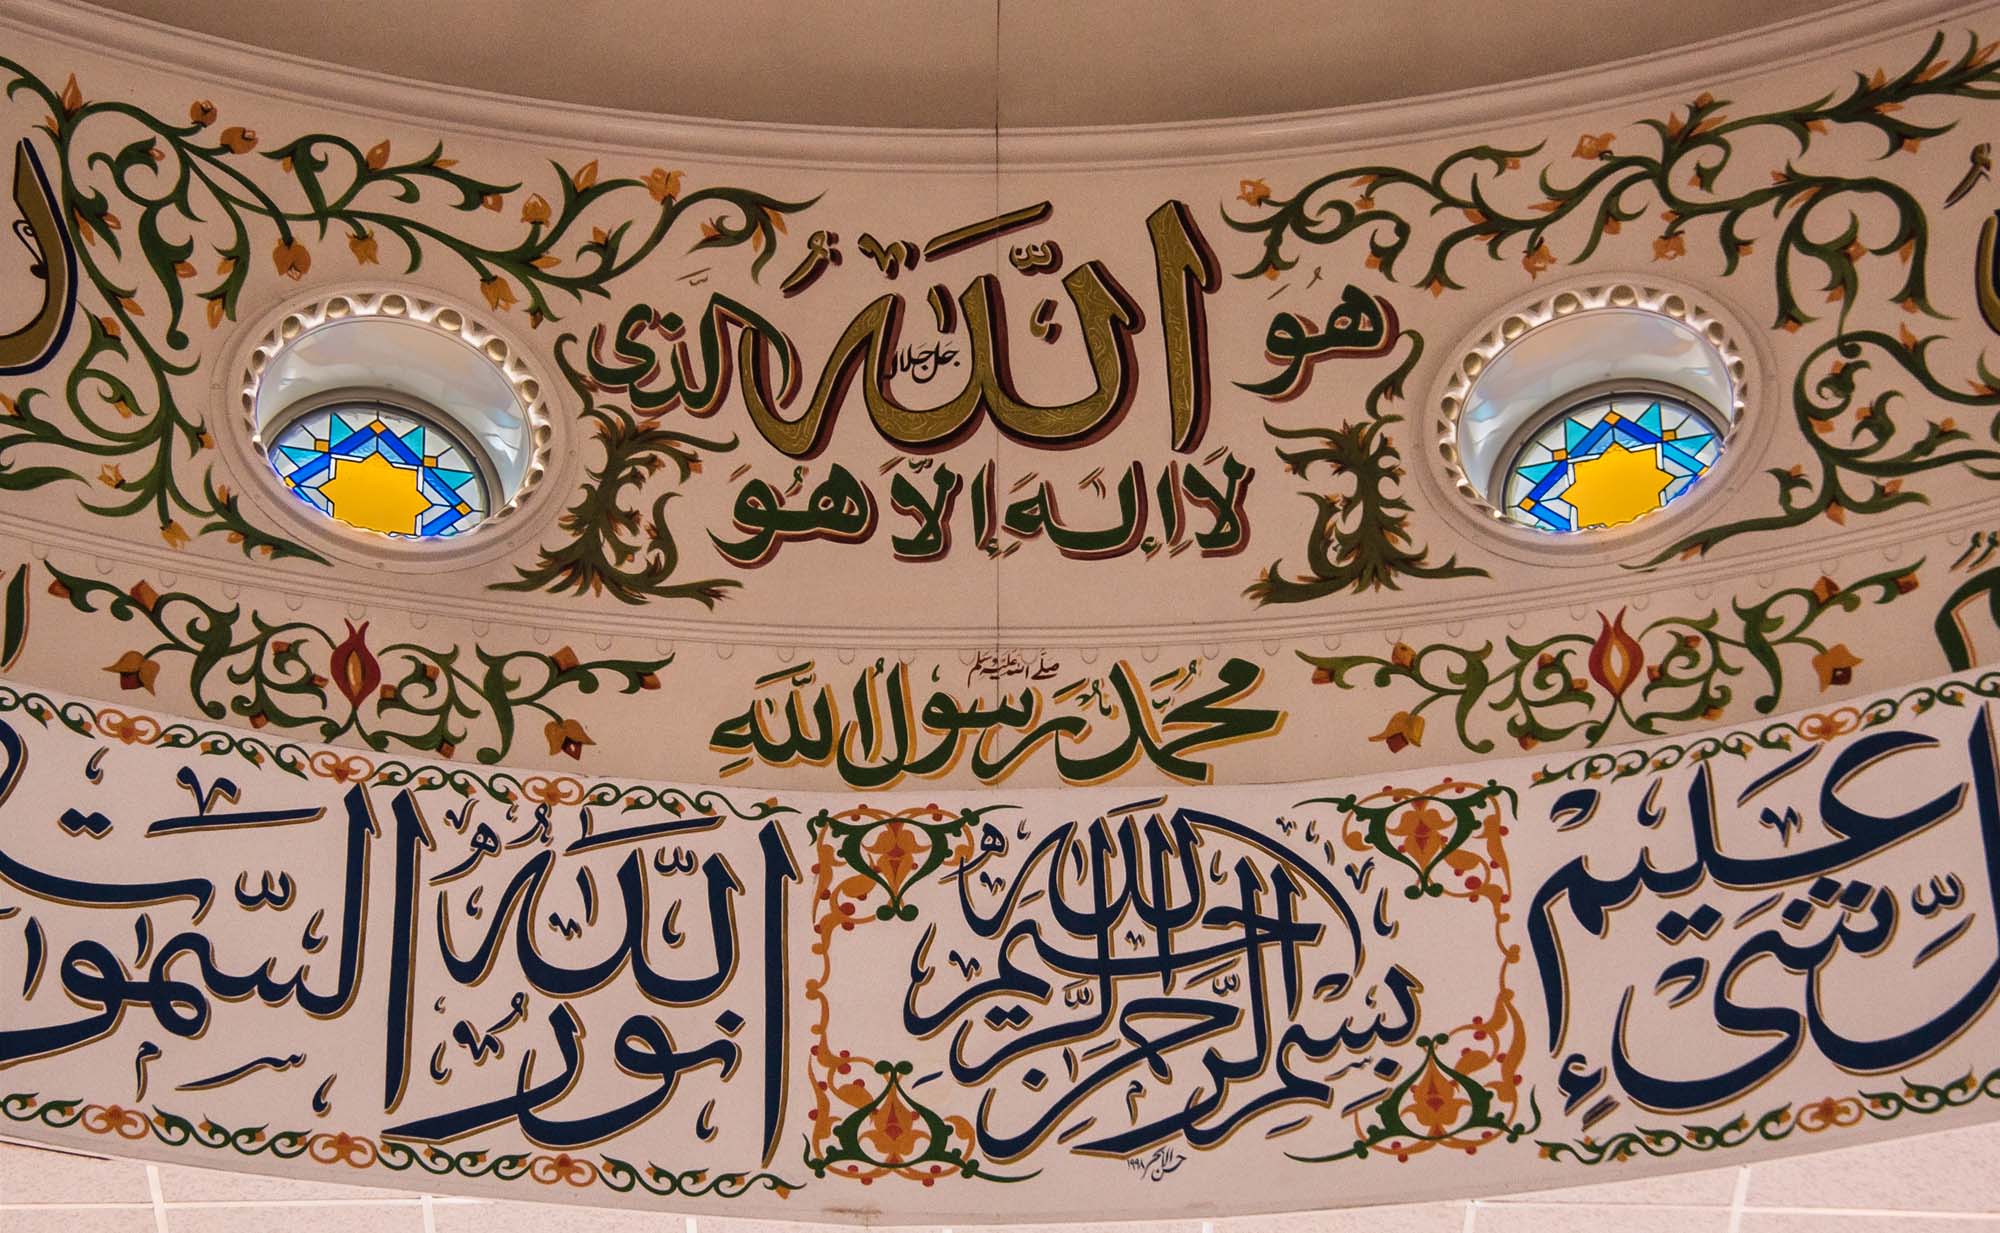 Islamic calligraphy adorns the inside of the dome - 